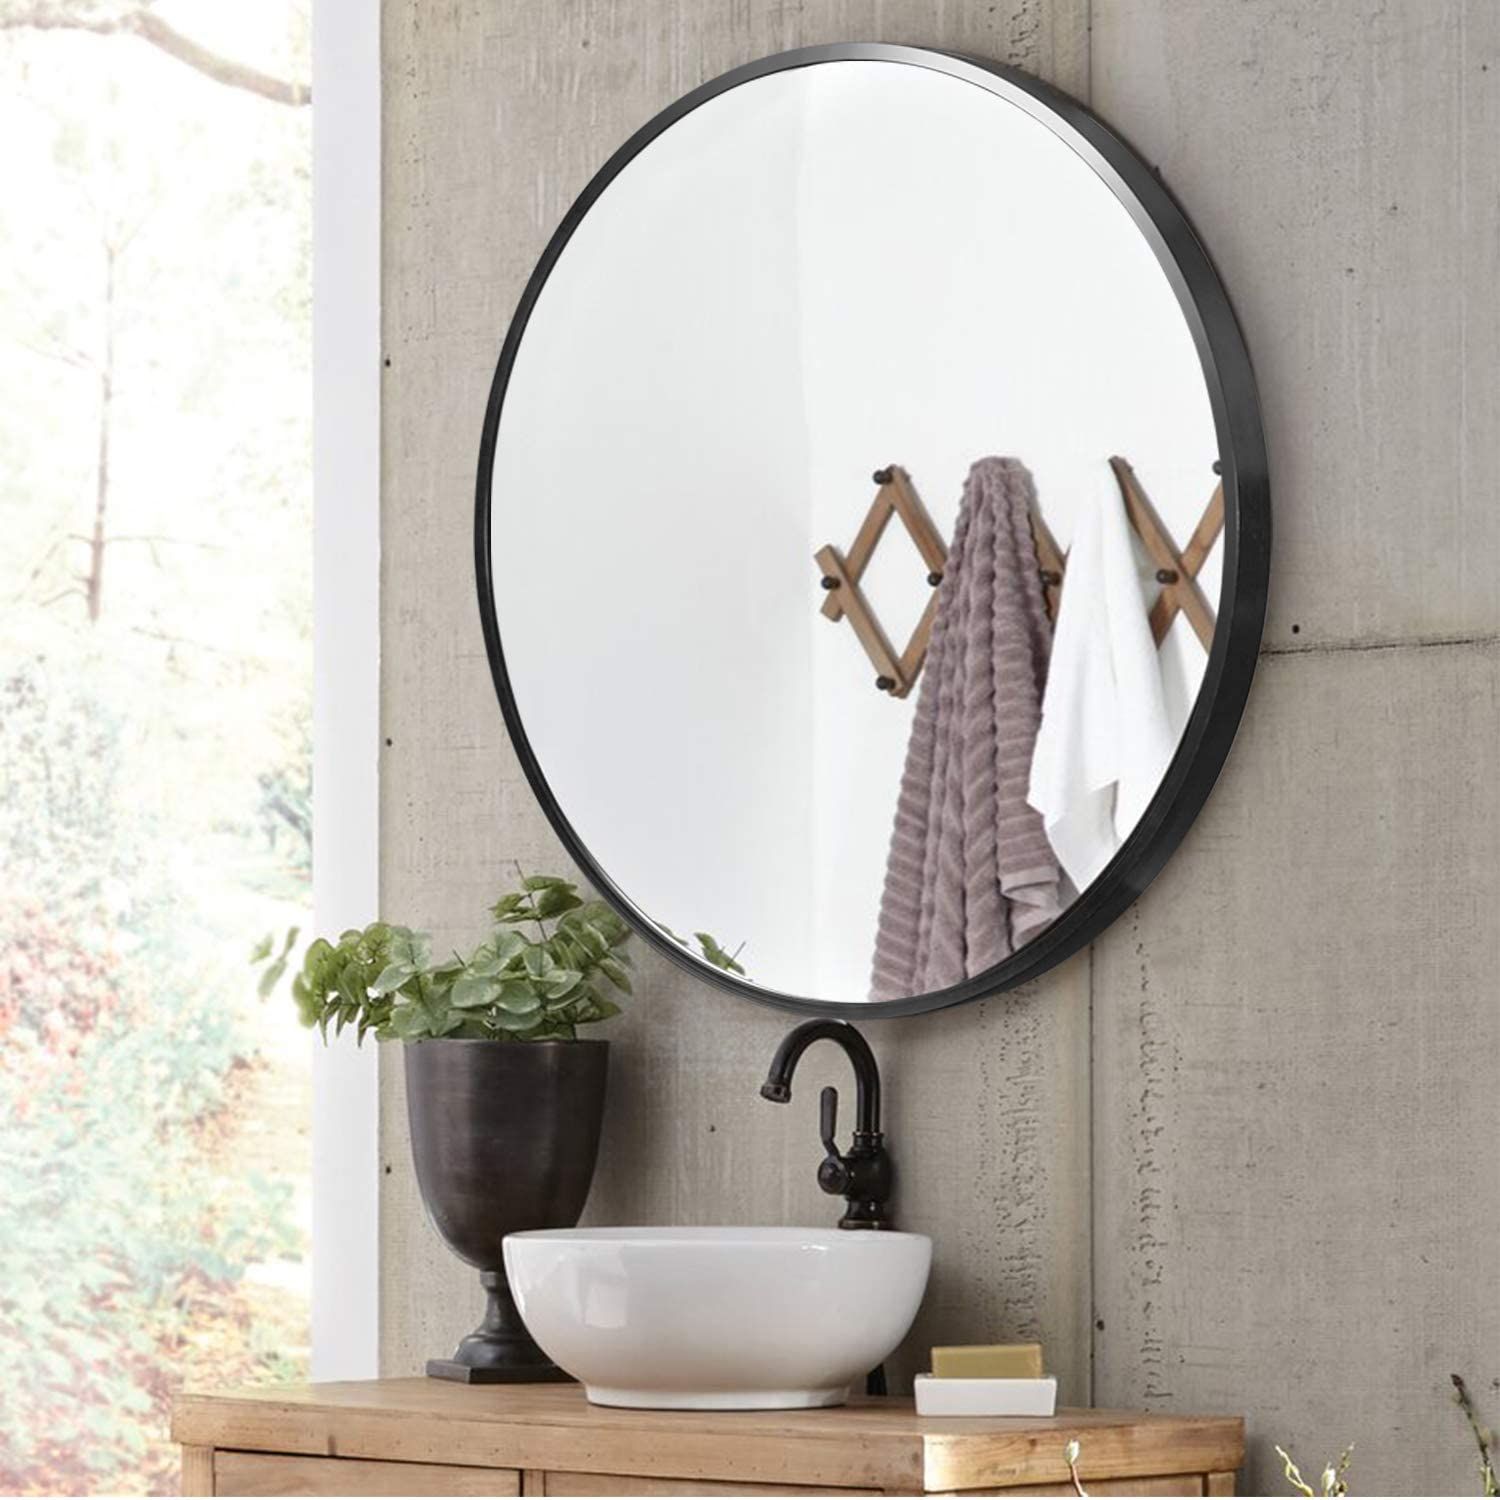 Neutype 32" Black Round Wall Mirror, Modern Aluminum Alloy Frame Accent Pertaining To Round Modern Wall Mirrors (View 5 of 15)